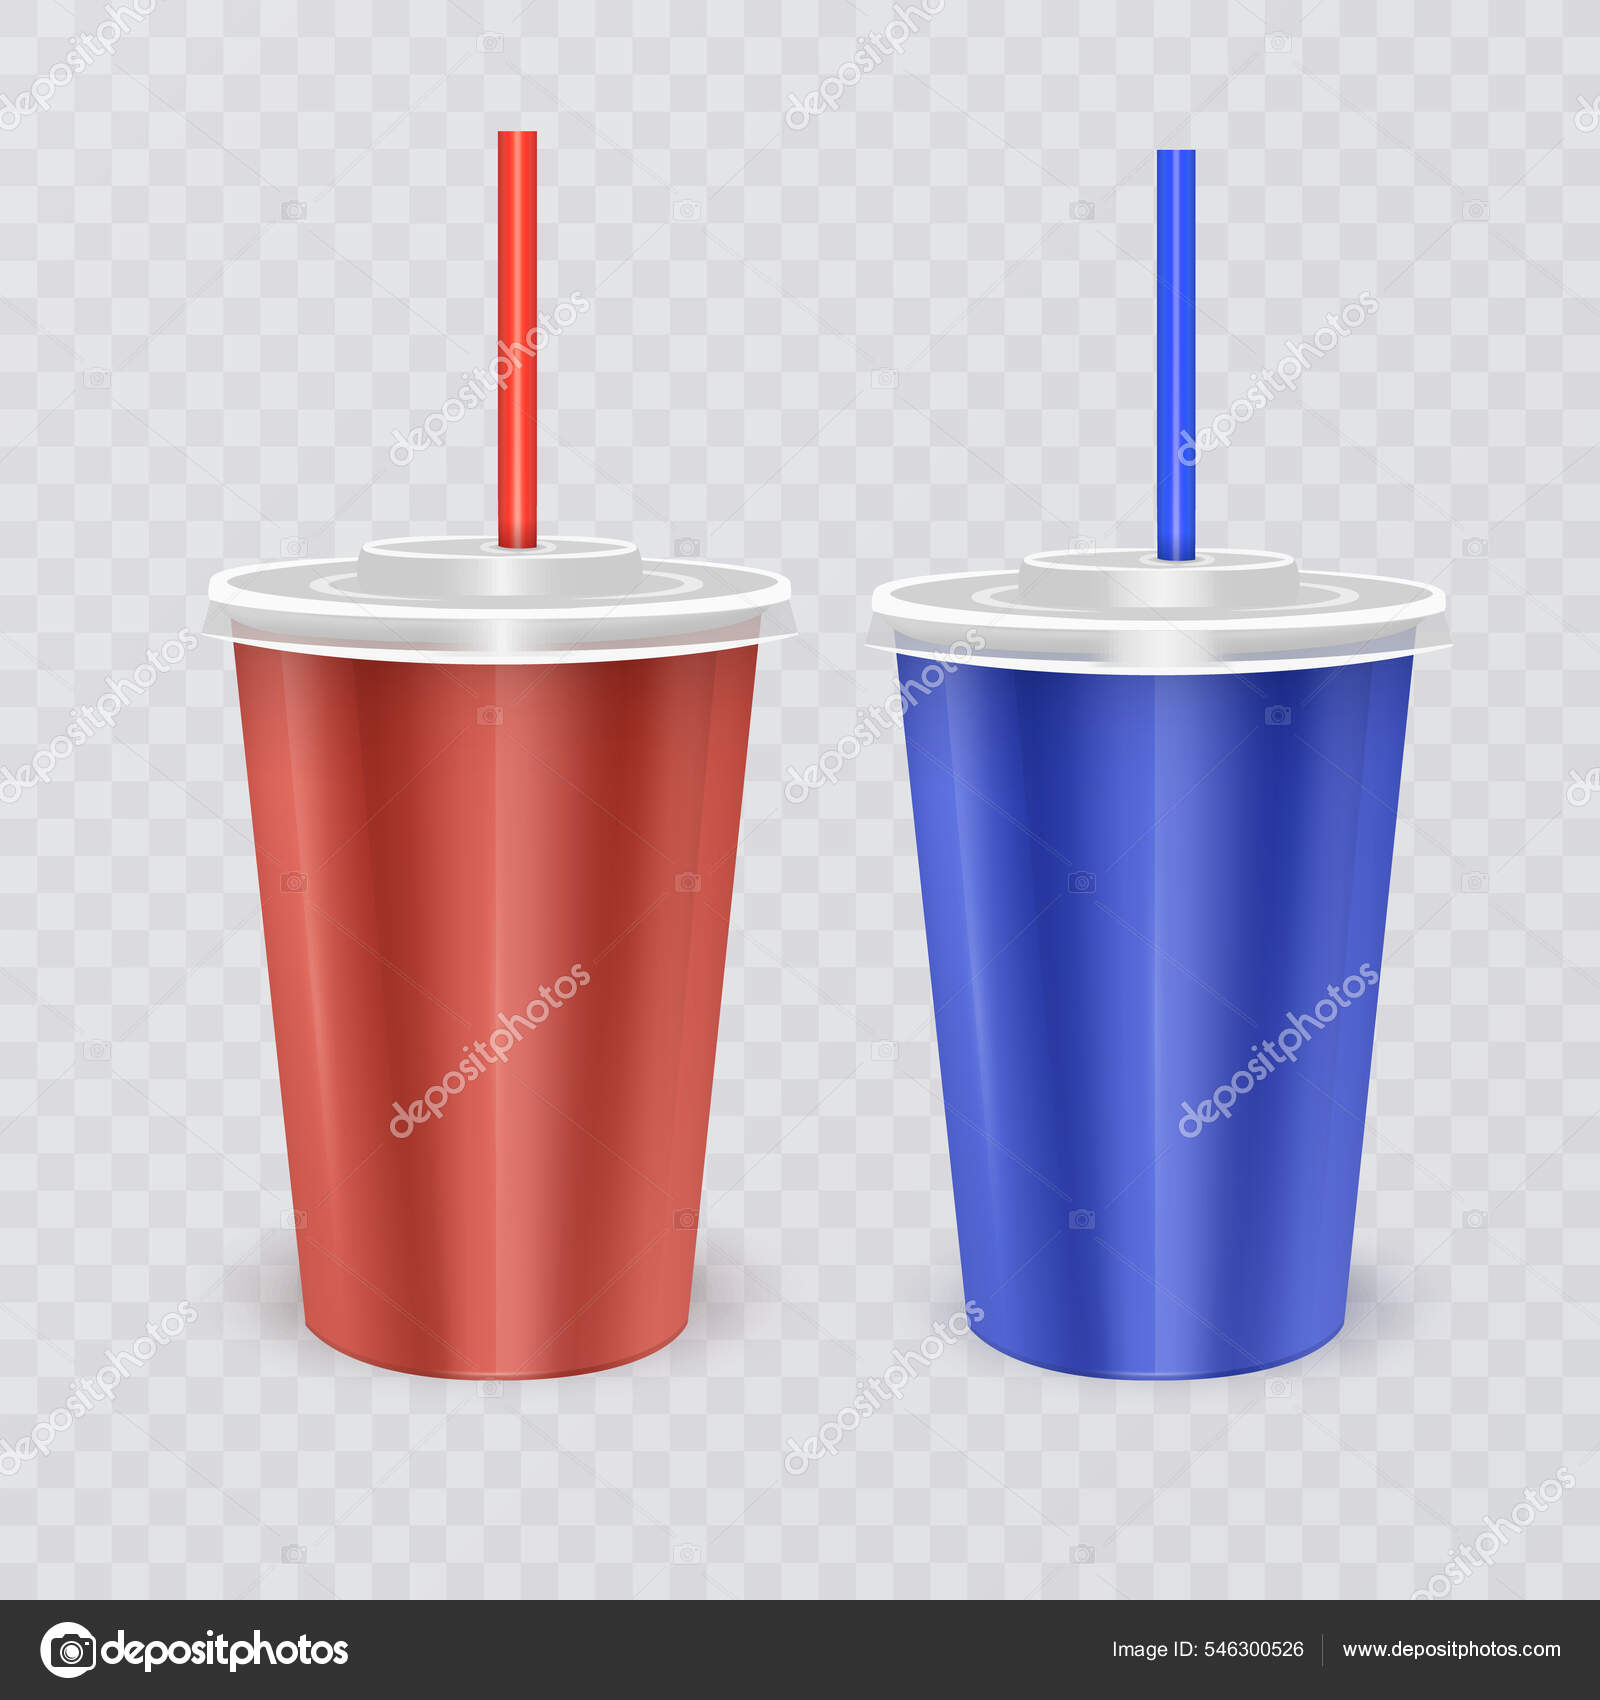 Plastic Cups With Lids and Straws 